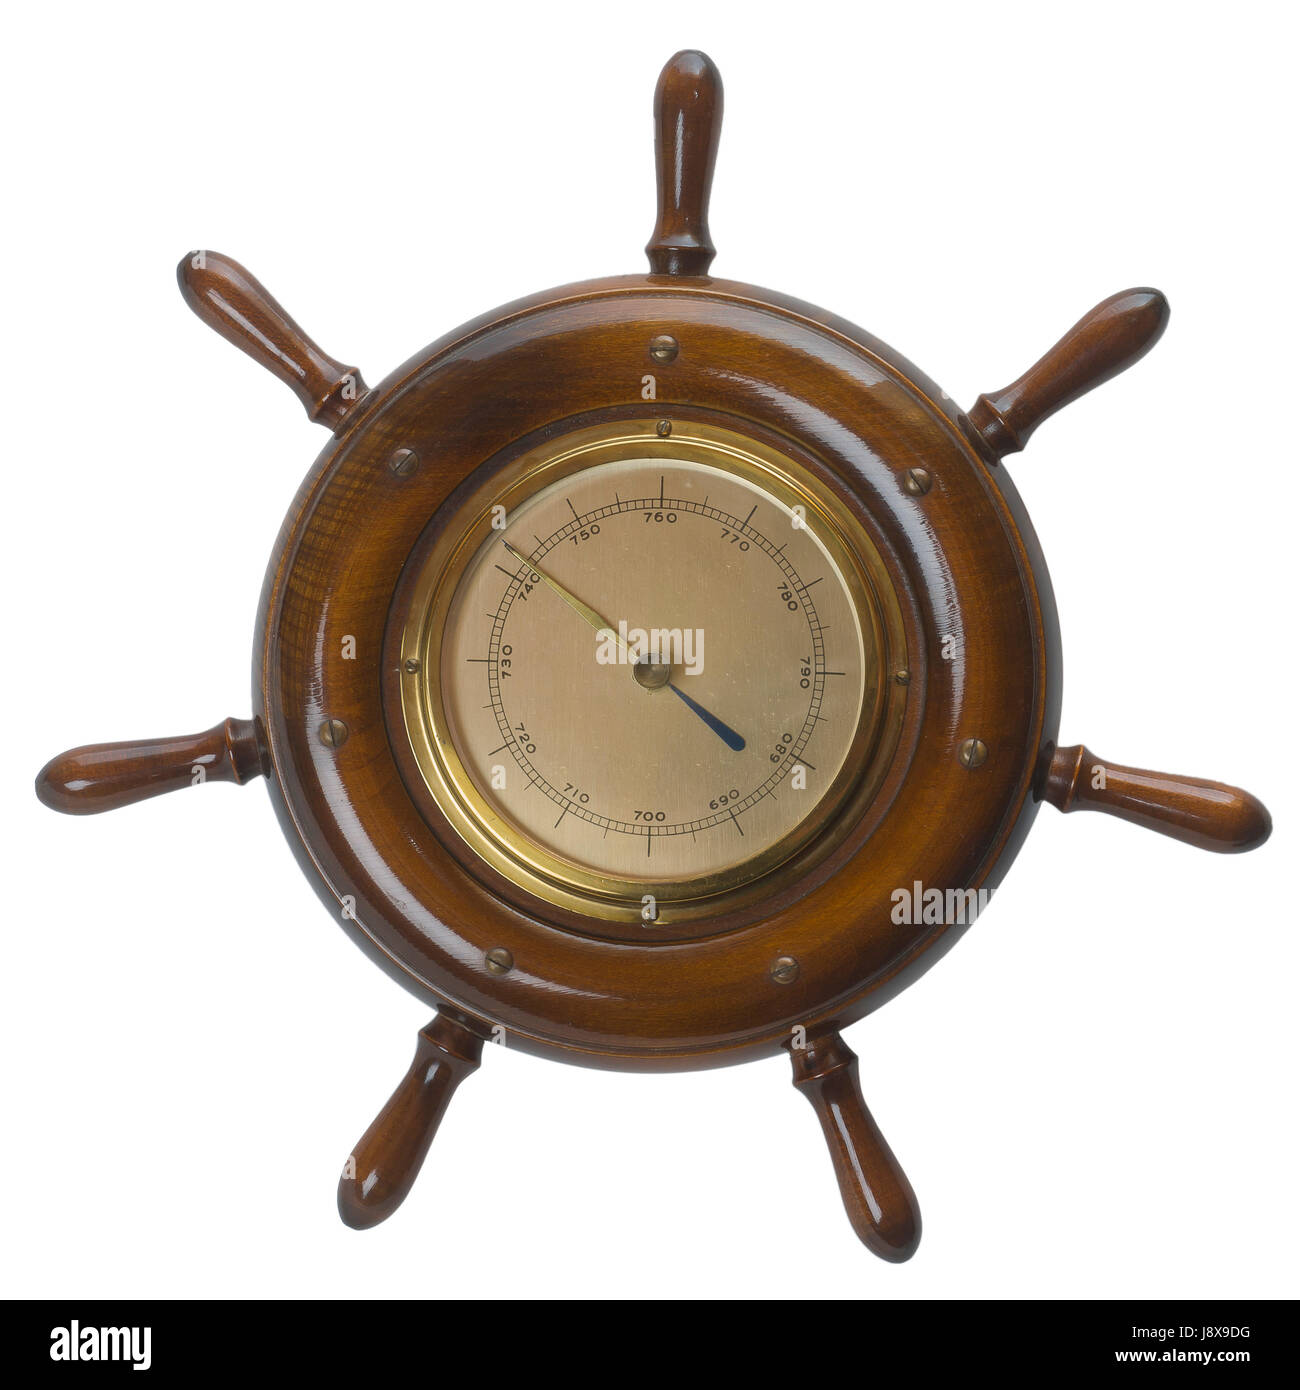 wheel, brass, boat, weather, barometer, pressure, rowing boat, sailing boat, Stock Photo